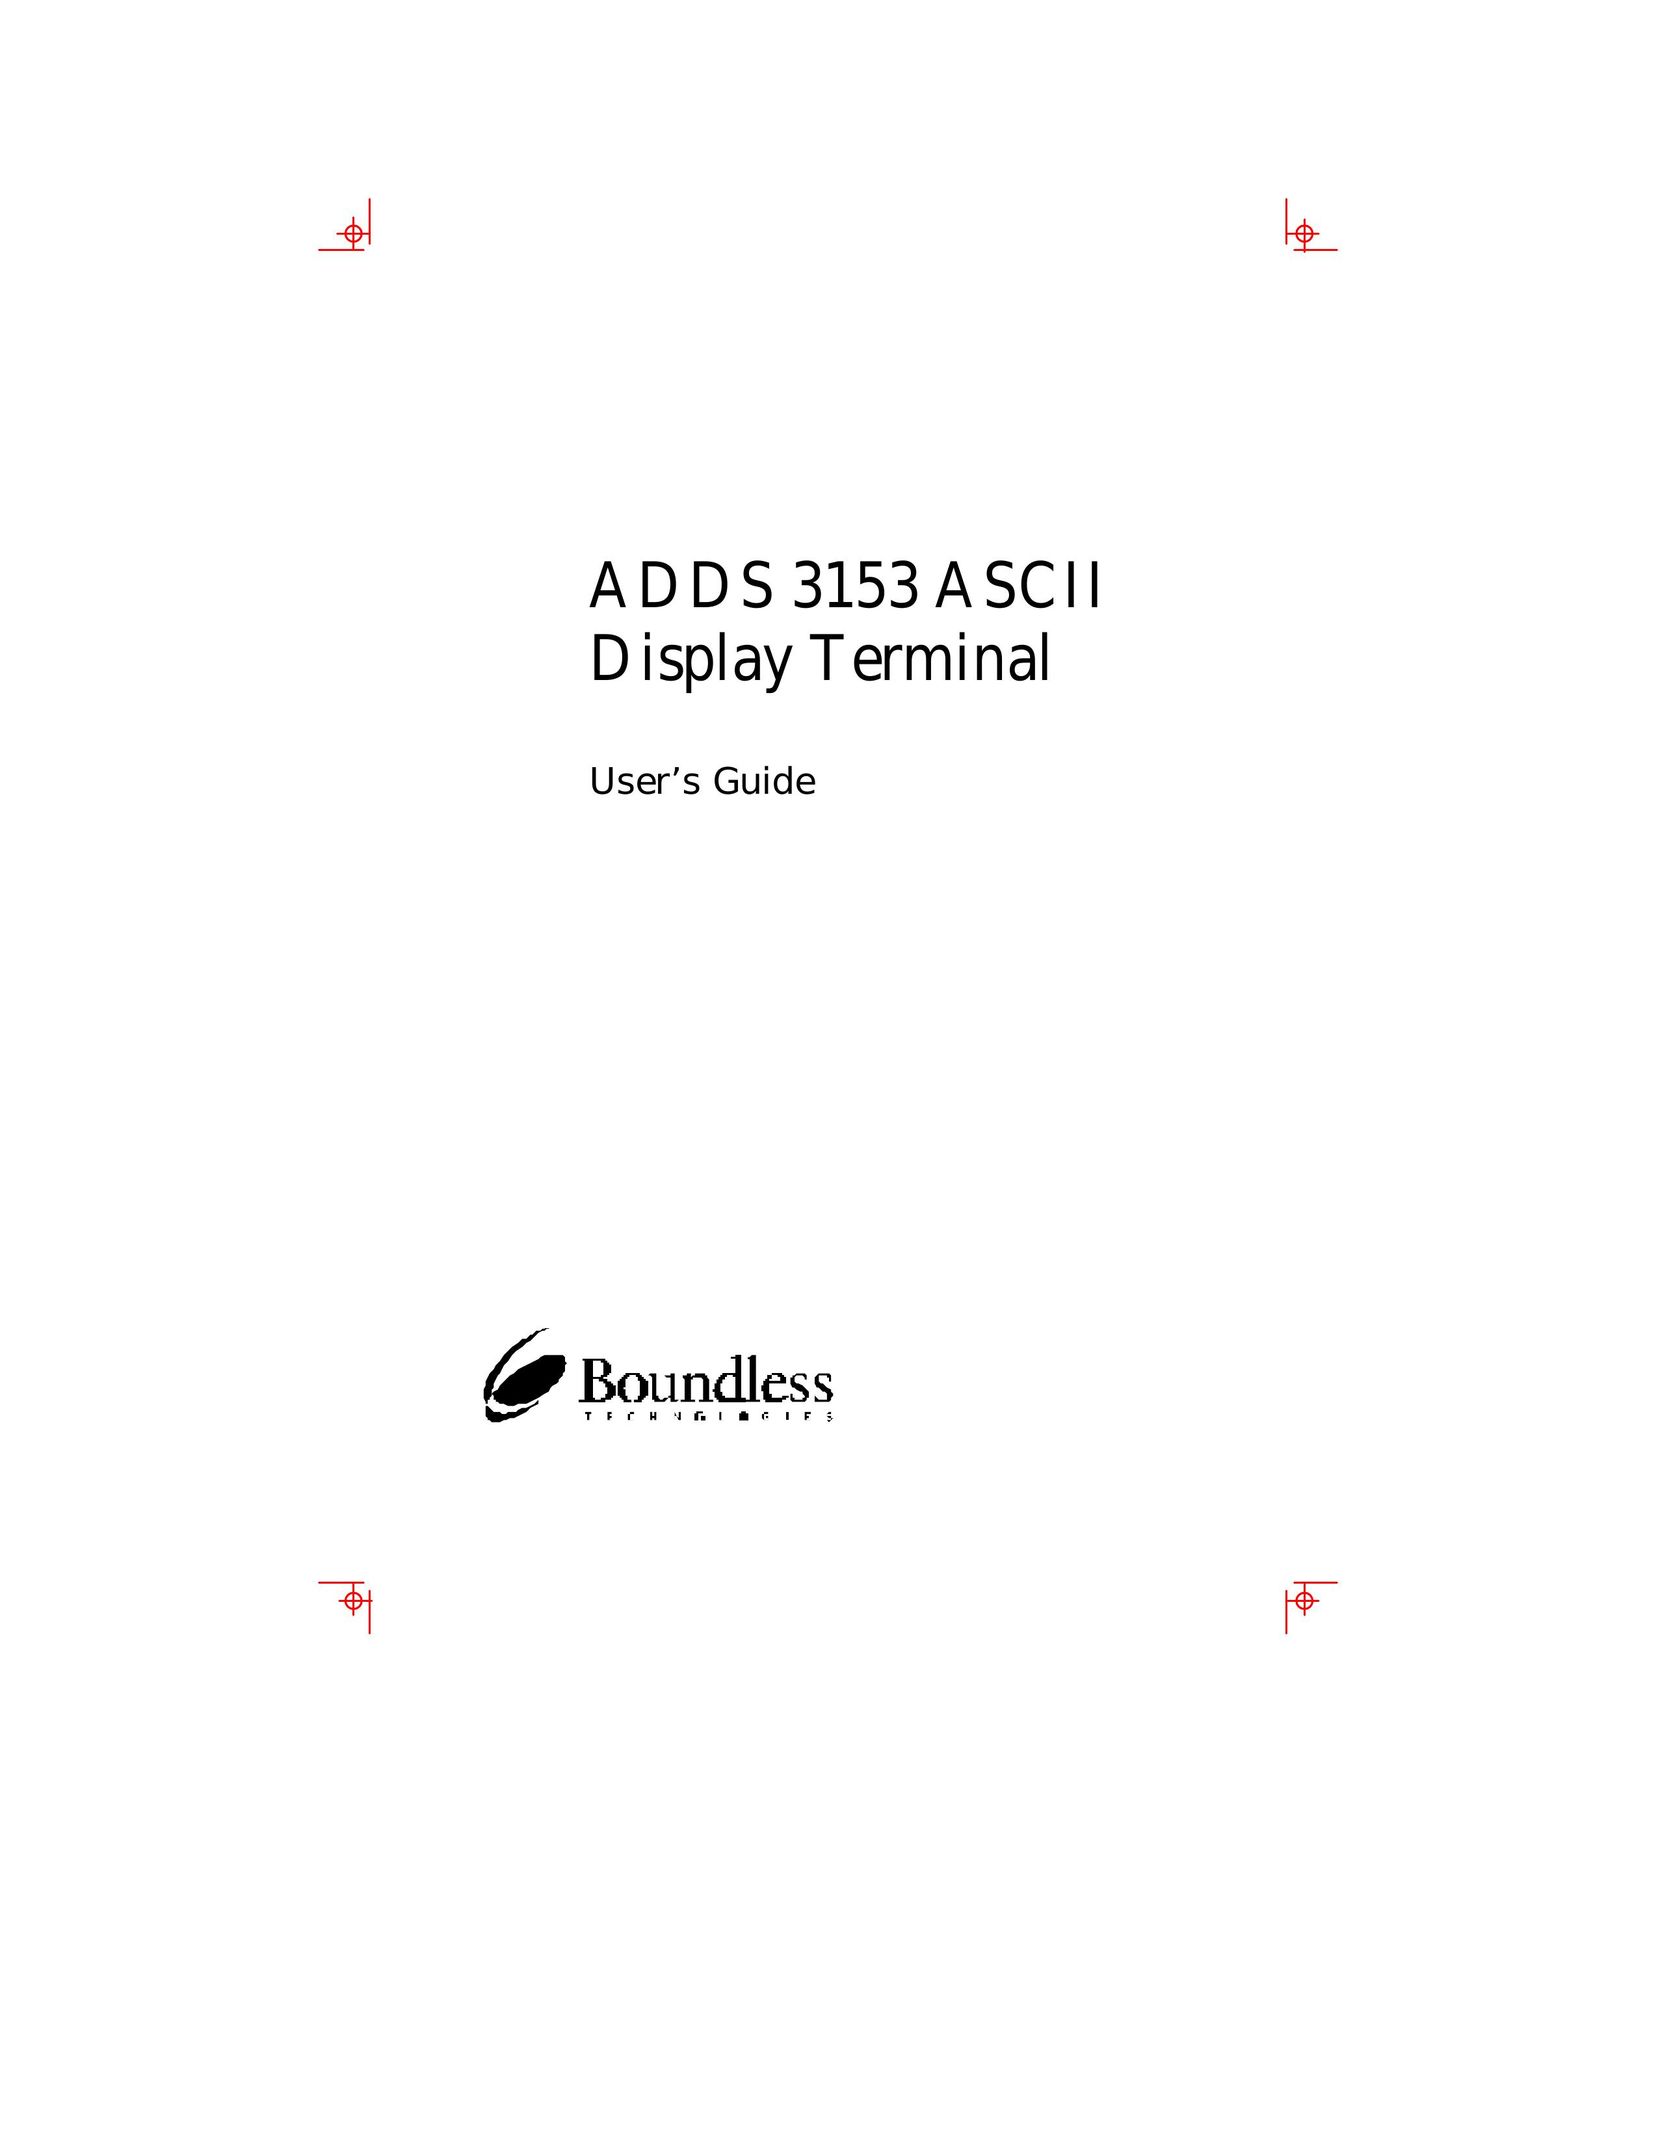 Boundless Technologies ADDS 3153 ASCII Stereo System User Manual